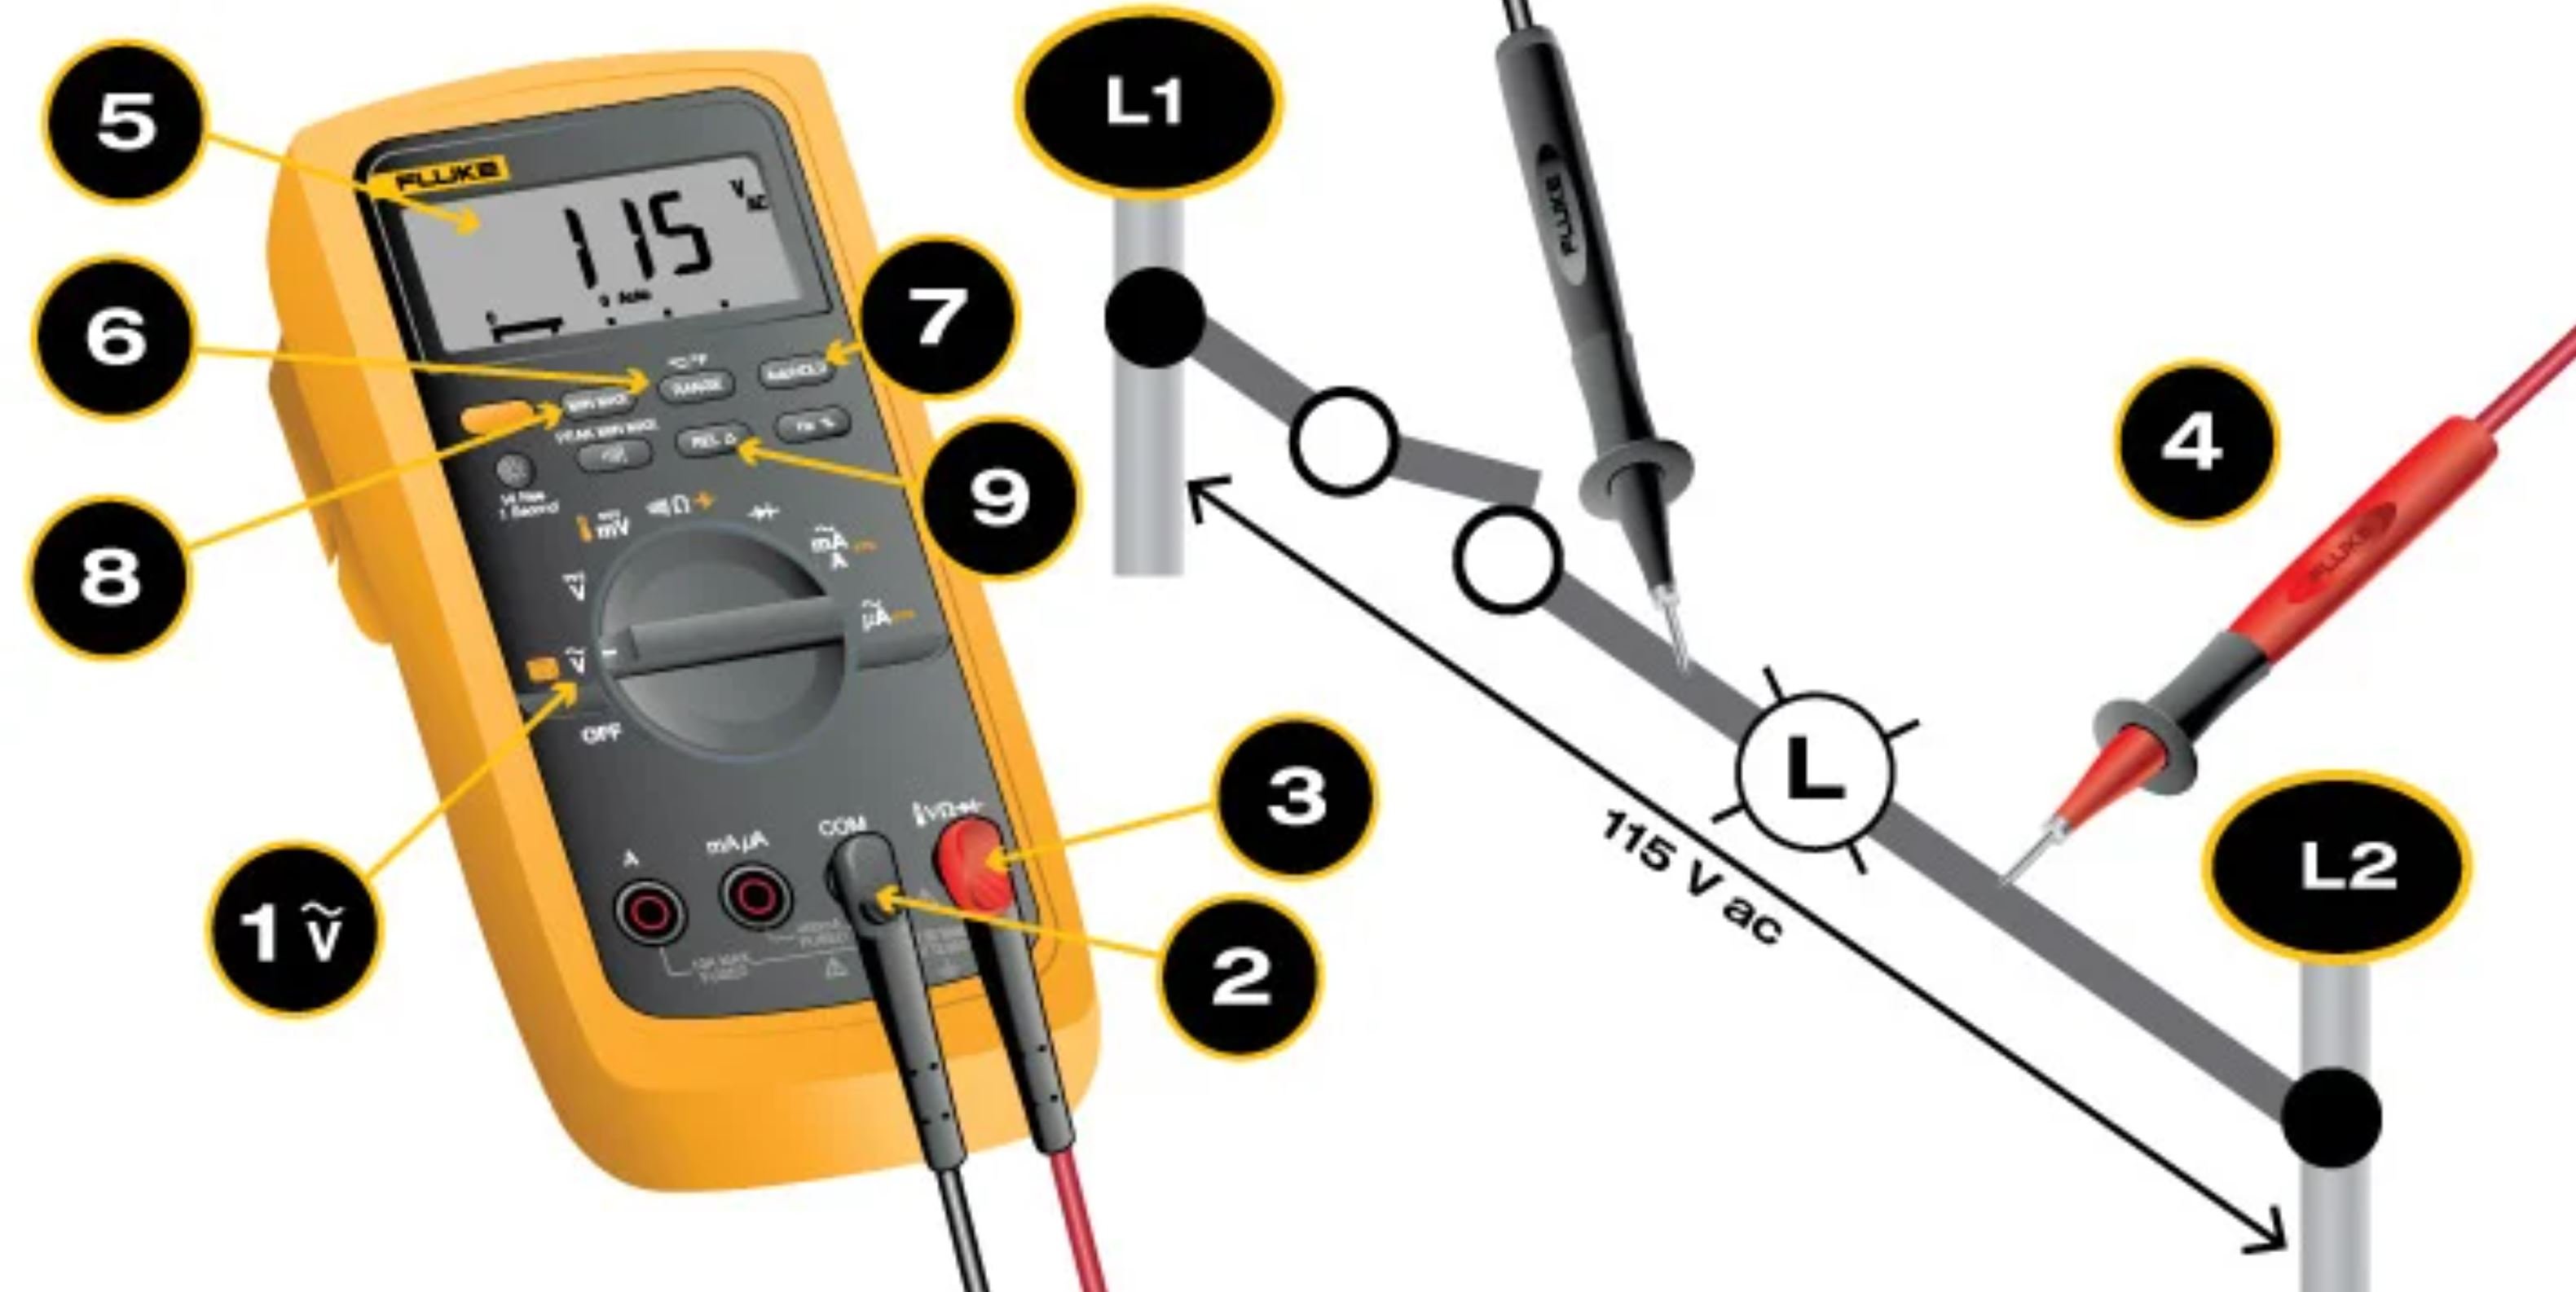 how to find a short in a wire with multimeter